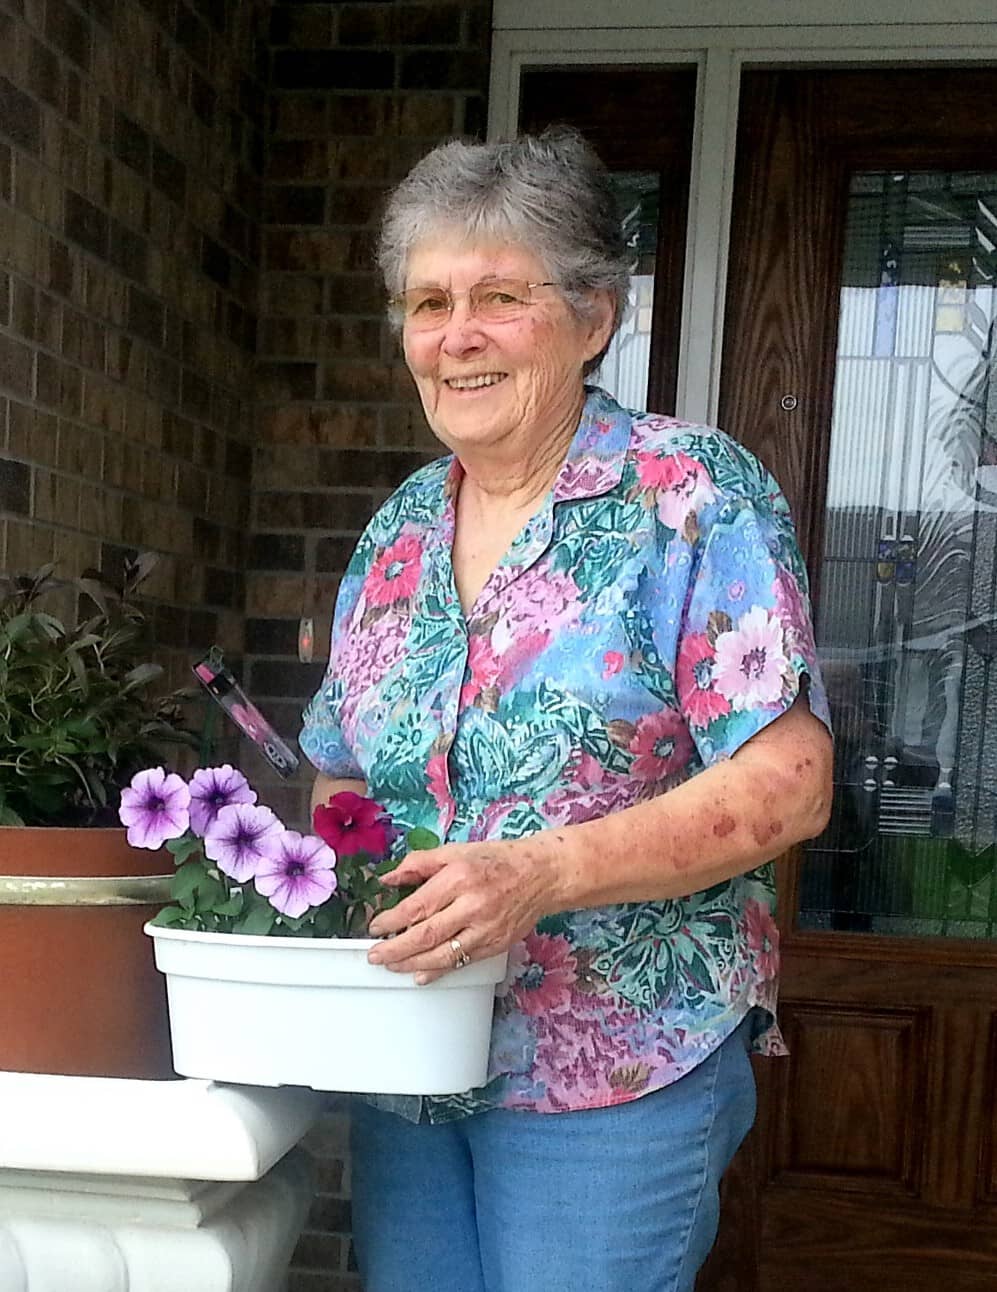 ruth-and-new-flowers-at-front-door-2